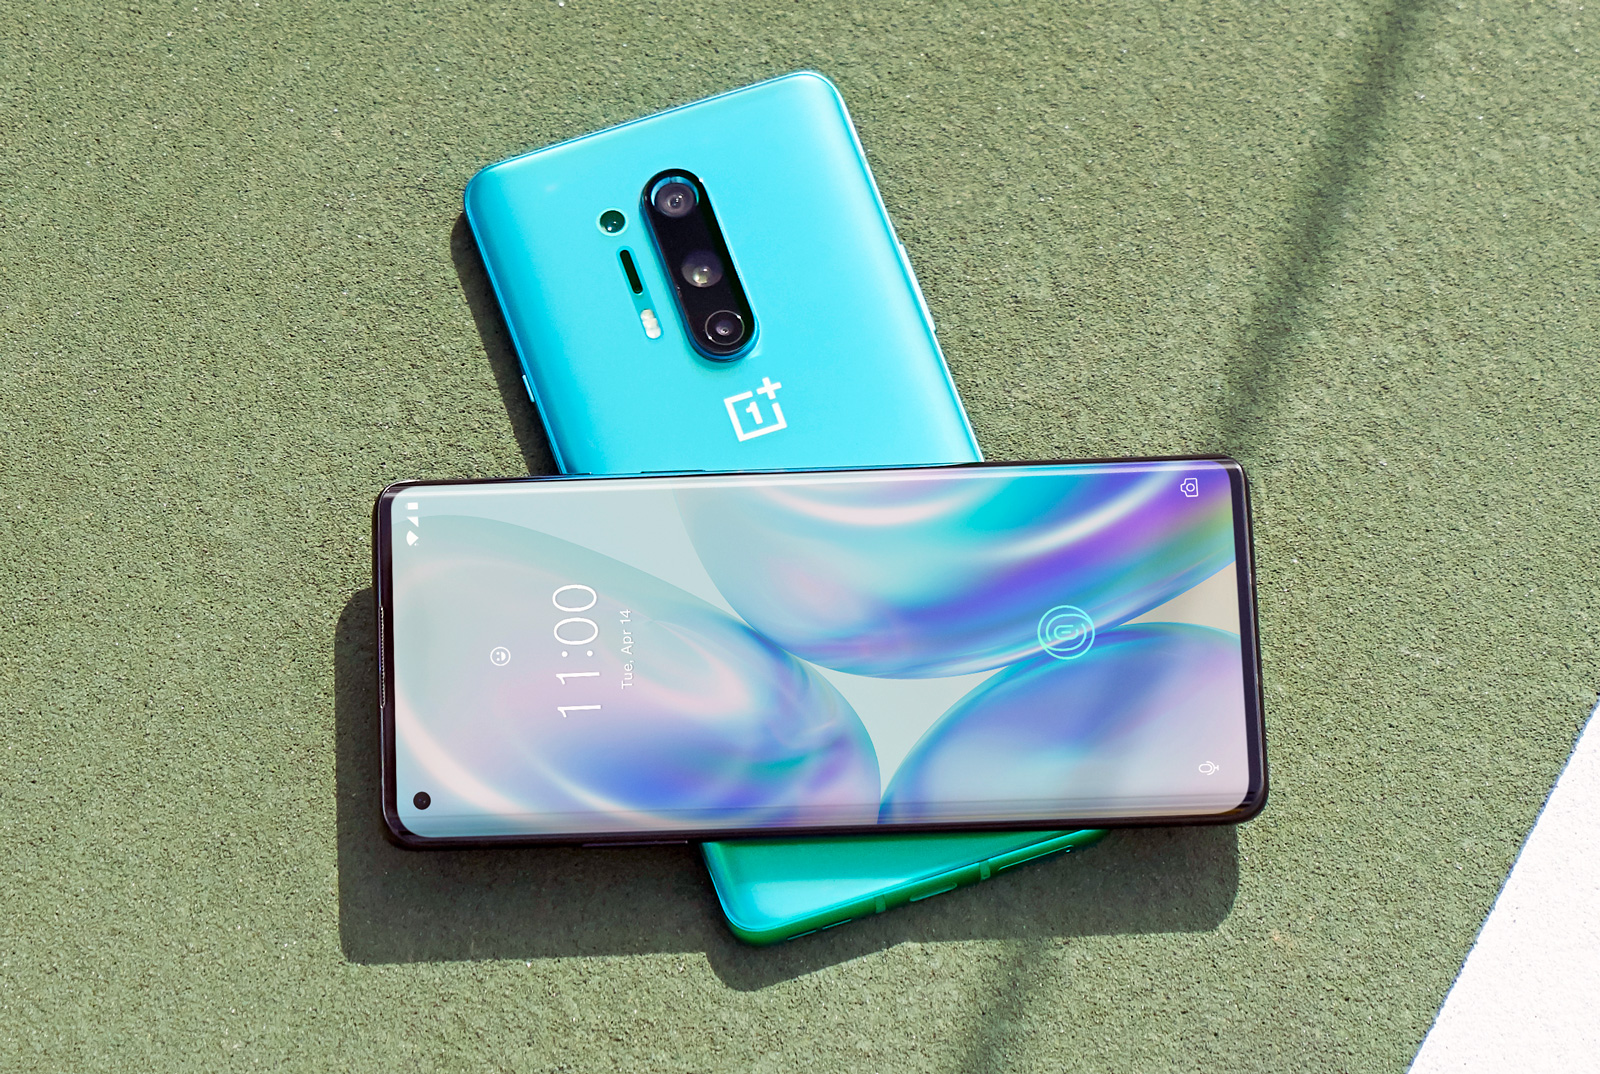 OnePlus 8 Pro and OnePlus 8 revealed: Here's what you need to know